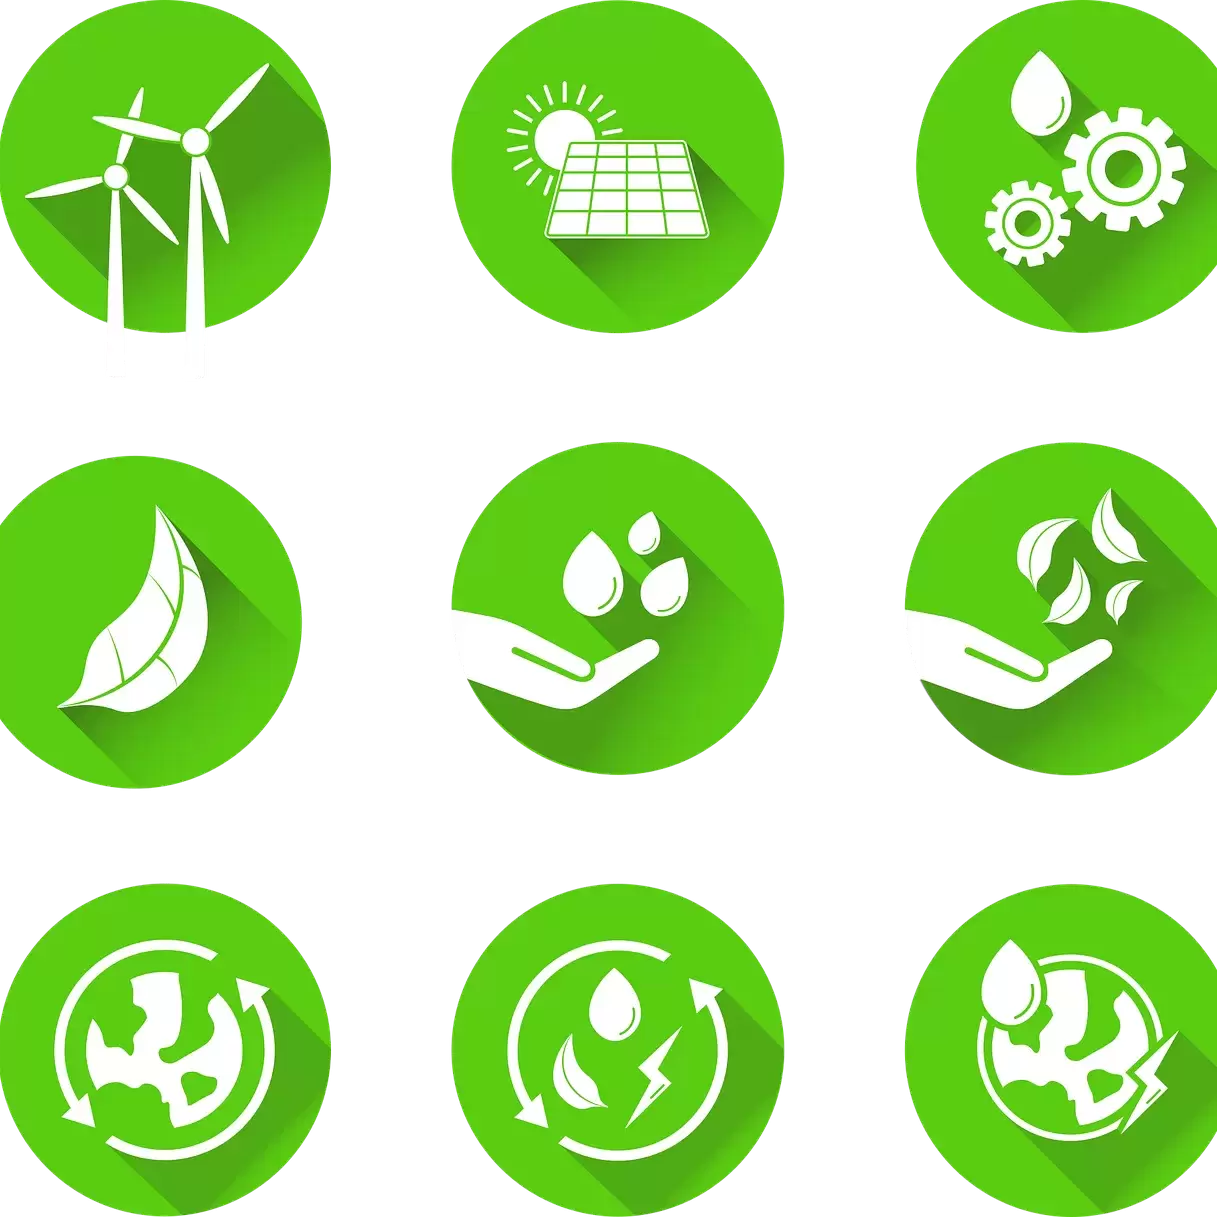 Symbols for staying green and helping the environment